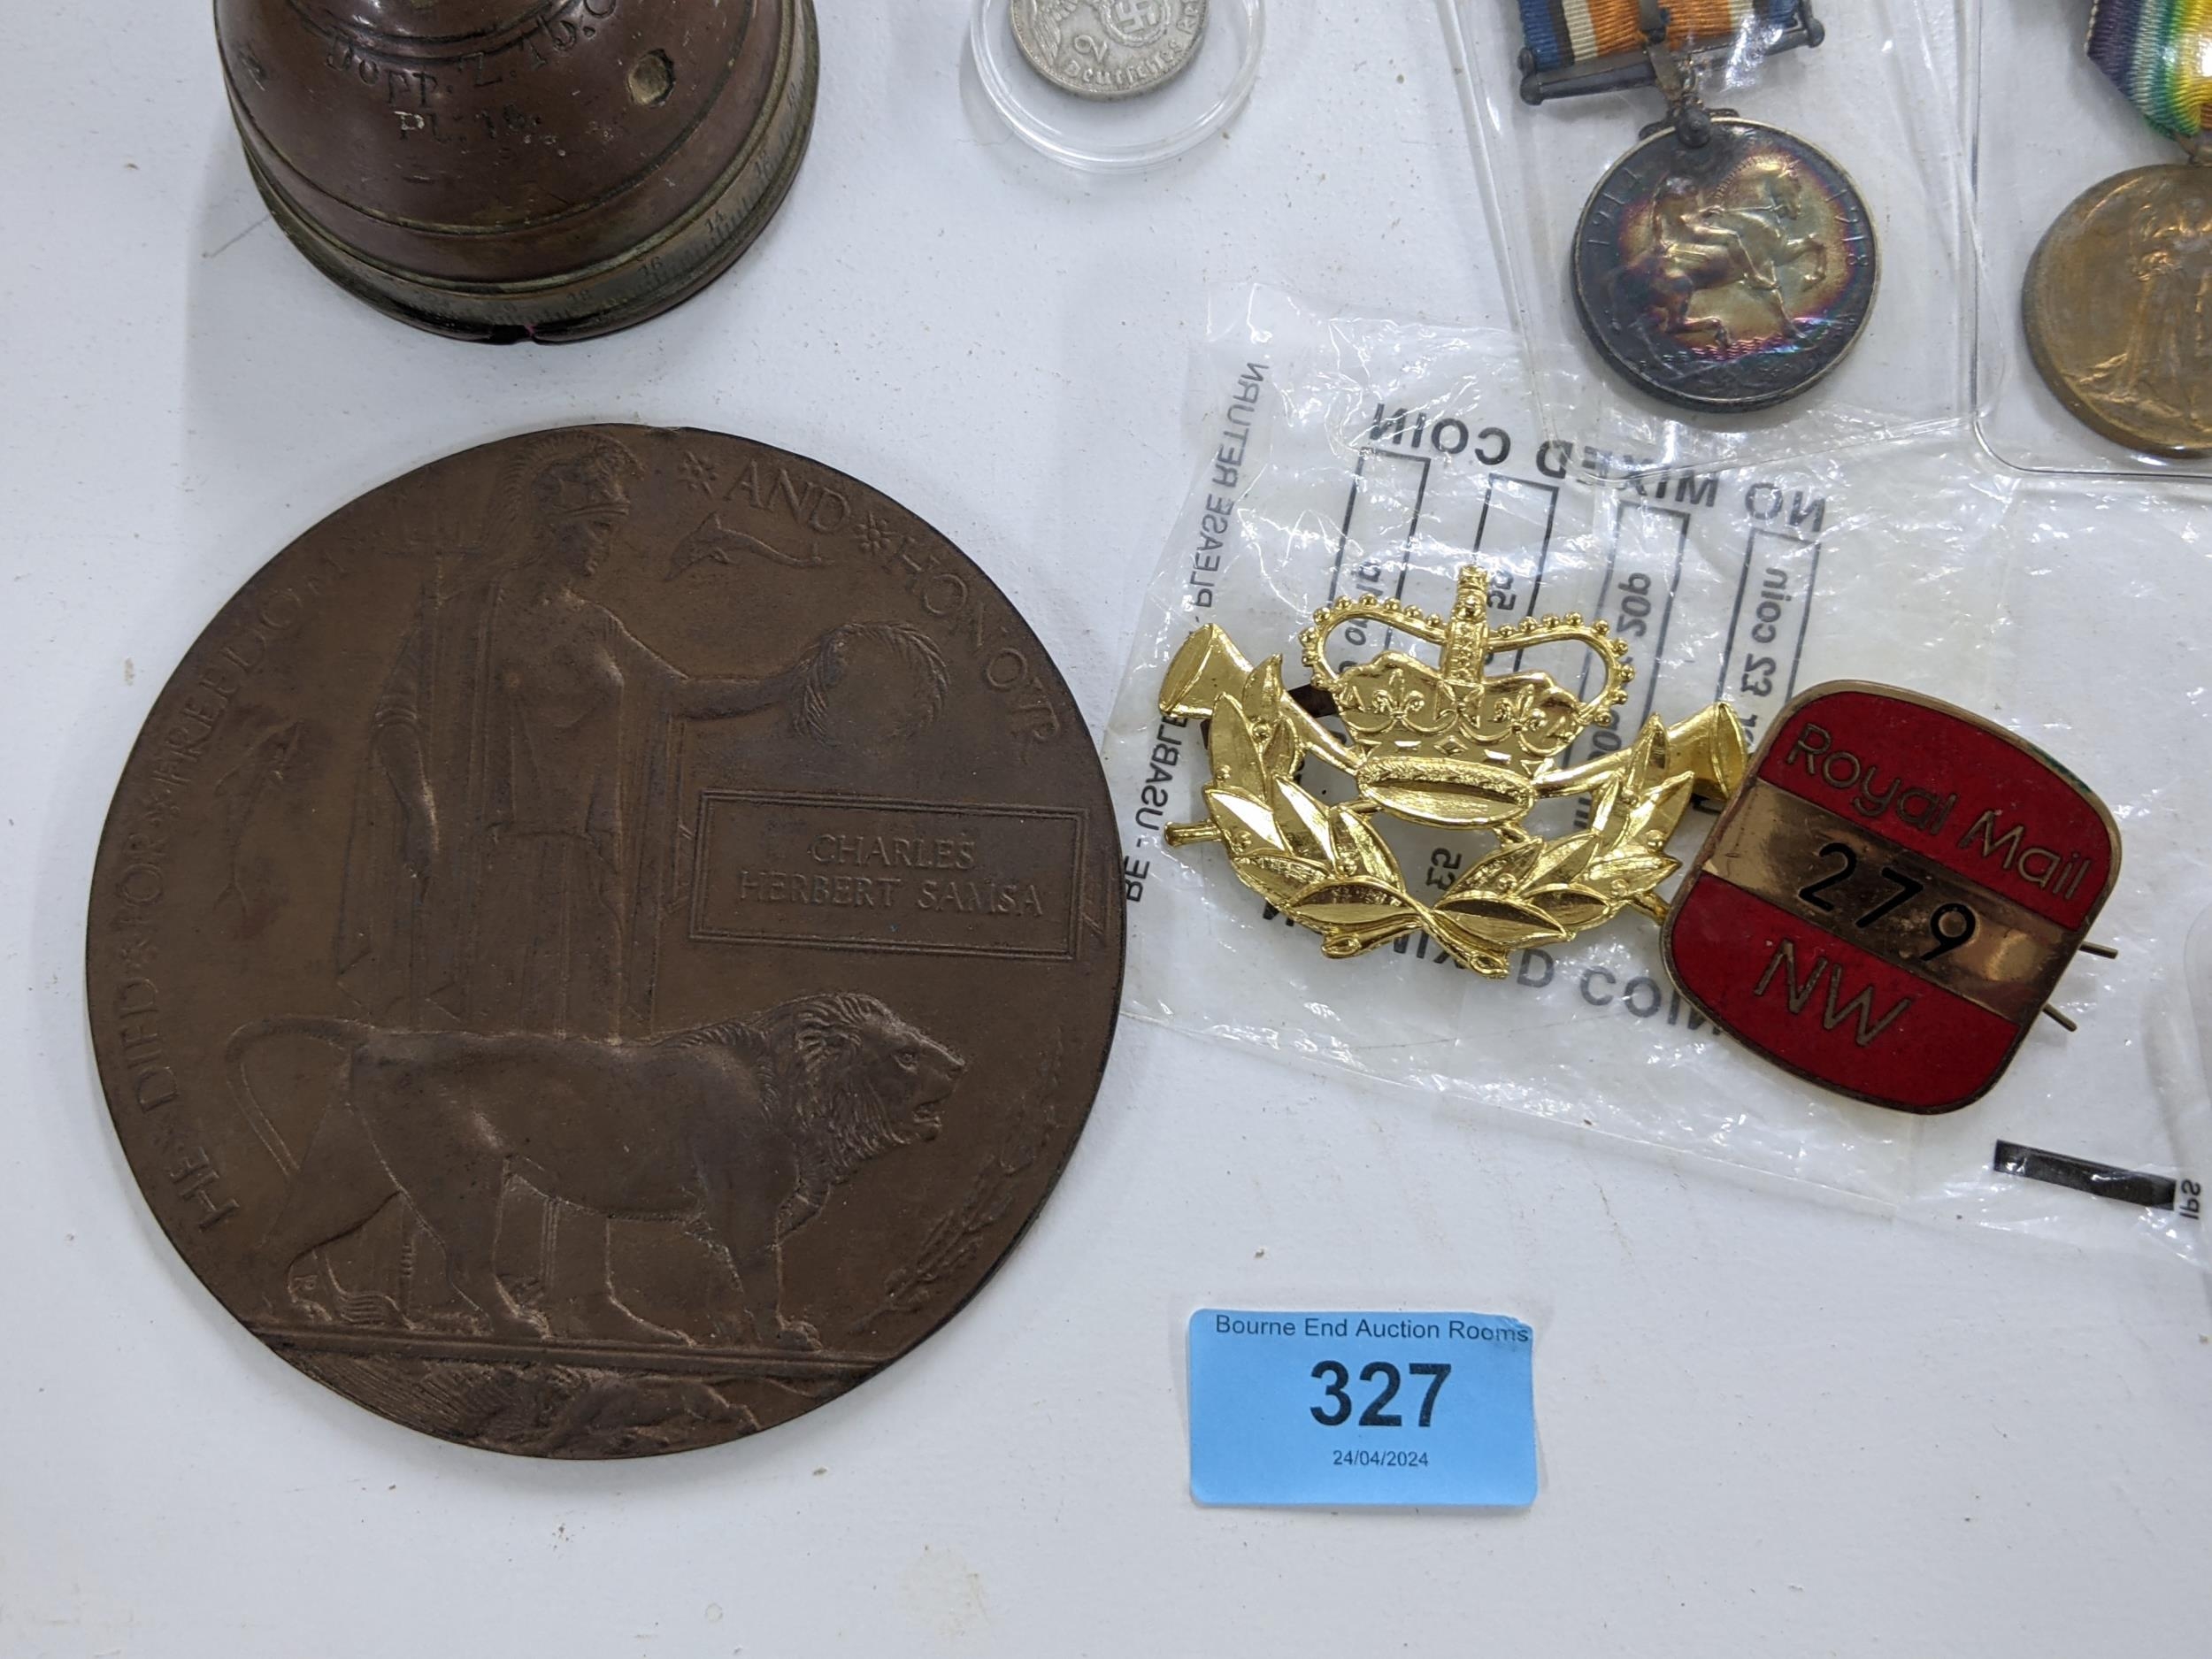 Militaria to include a memorial plaque, medals, a silver boxing trophy, cap badge, and German coin - Image 3 of 8